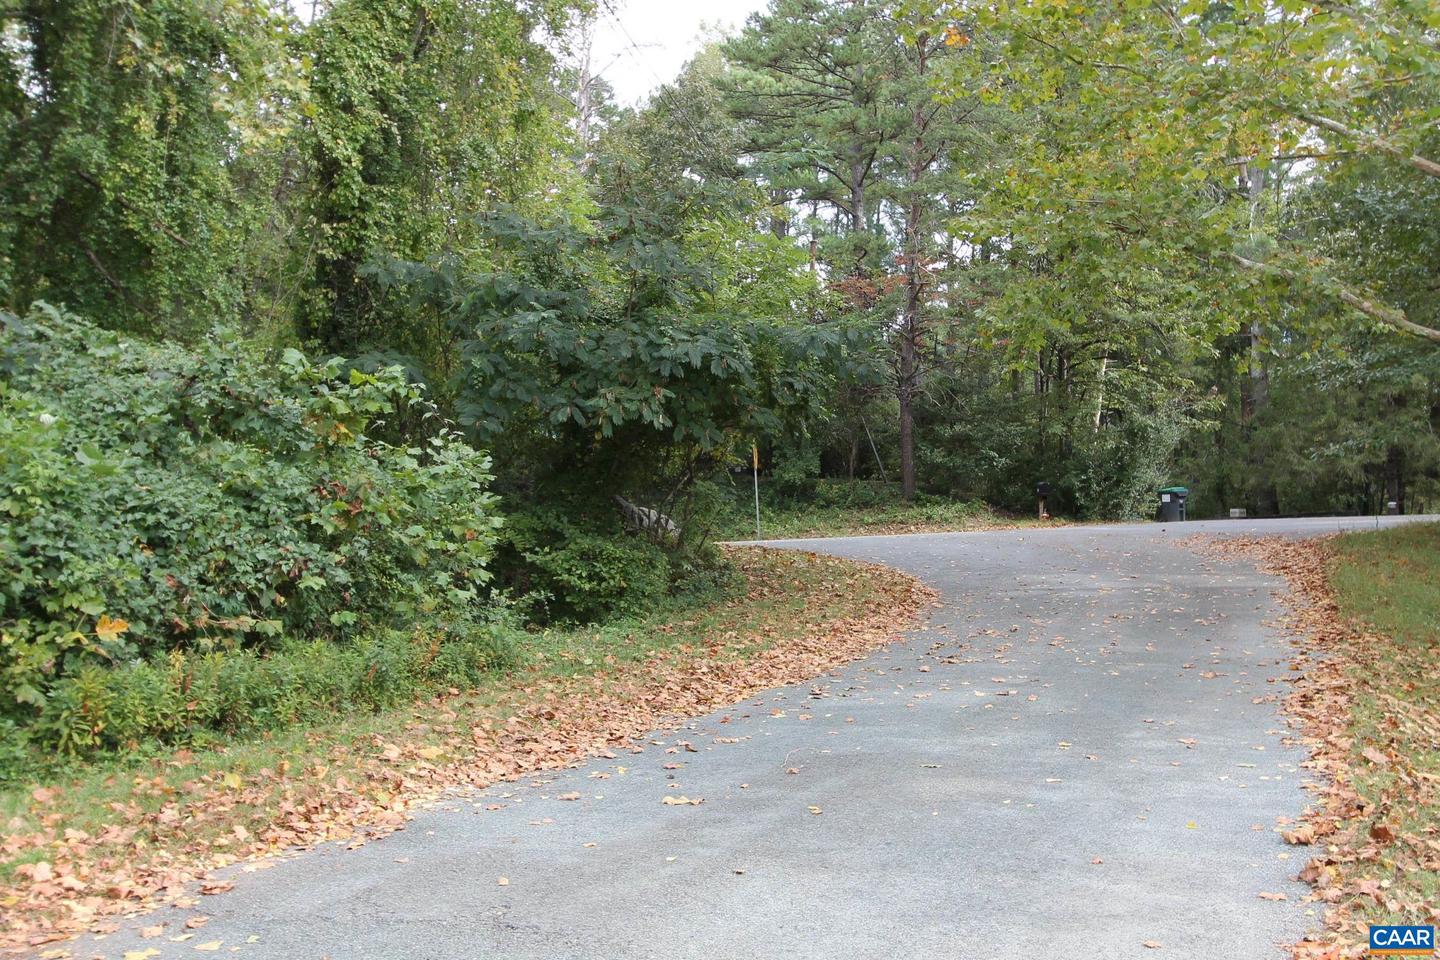 TBD MOUNTAIN VIEW DR, CHARLOTTESVILLE, Virginia 22903, ,Land,For sale,TBD MOUNTAIN VIEW DR,646500 MLS # 646500